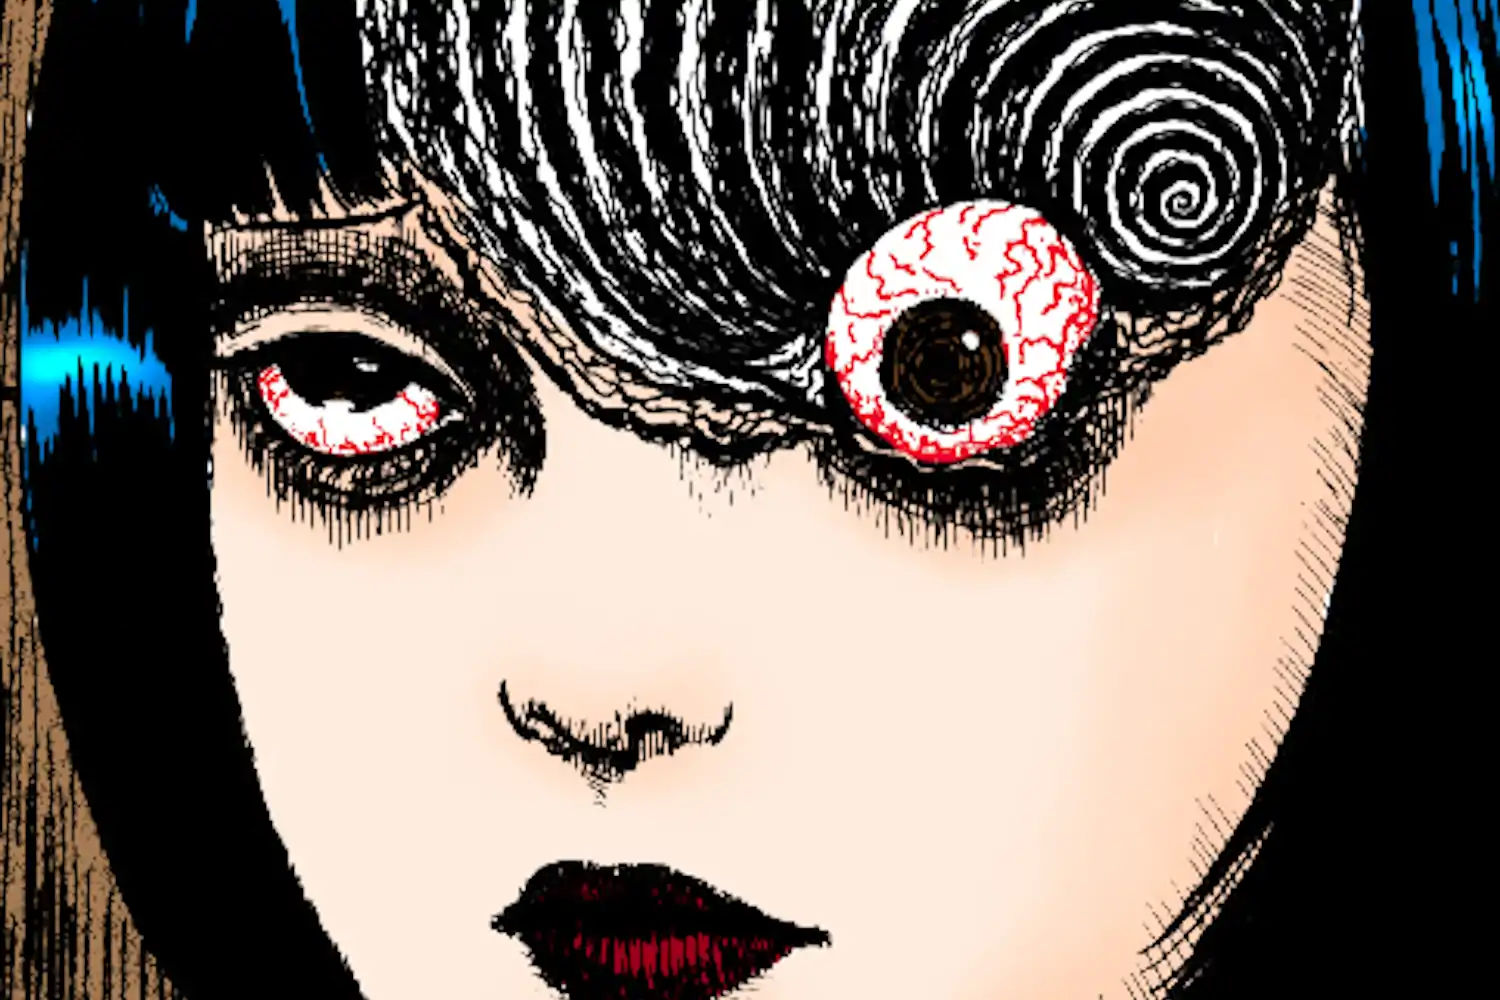 A still from Junji Ito's Uzumaki manga recolored by Enigmata the Hated